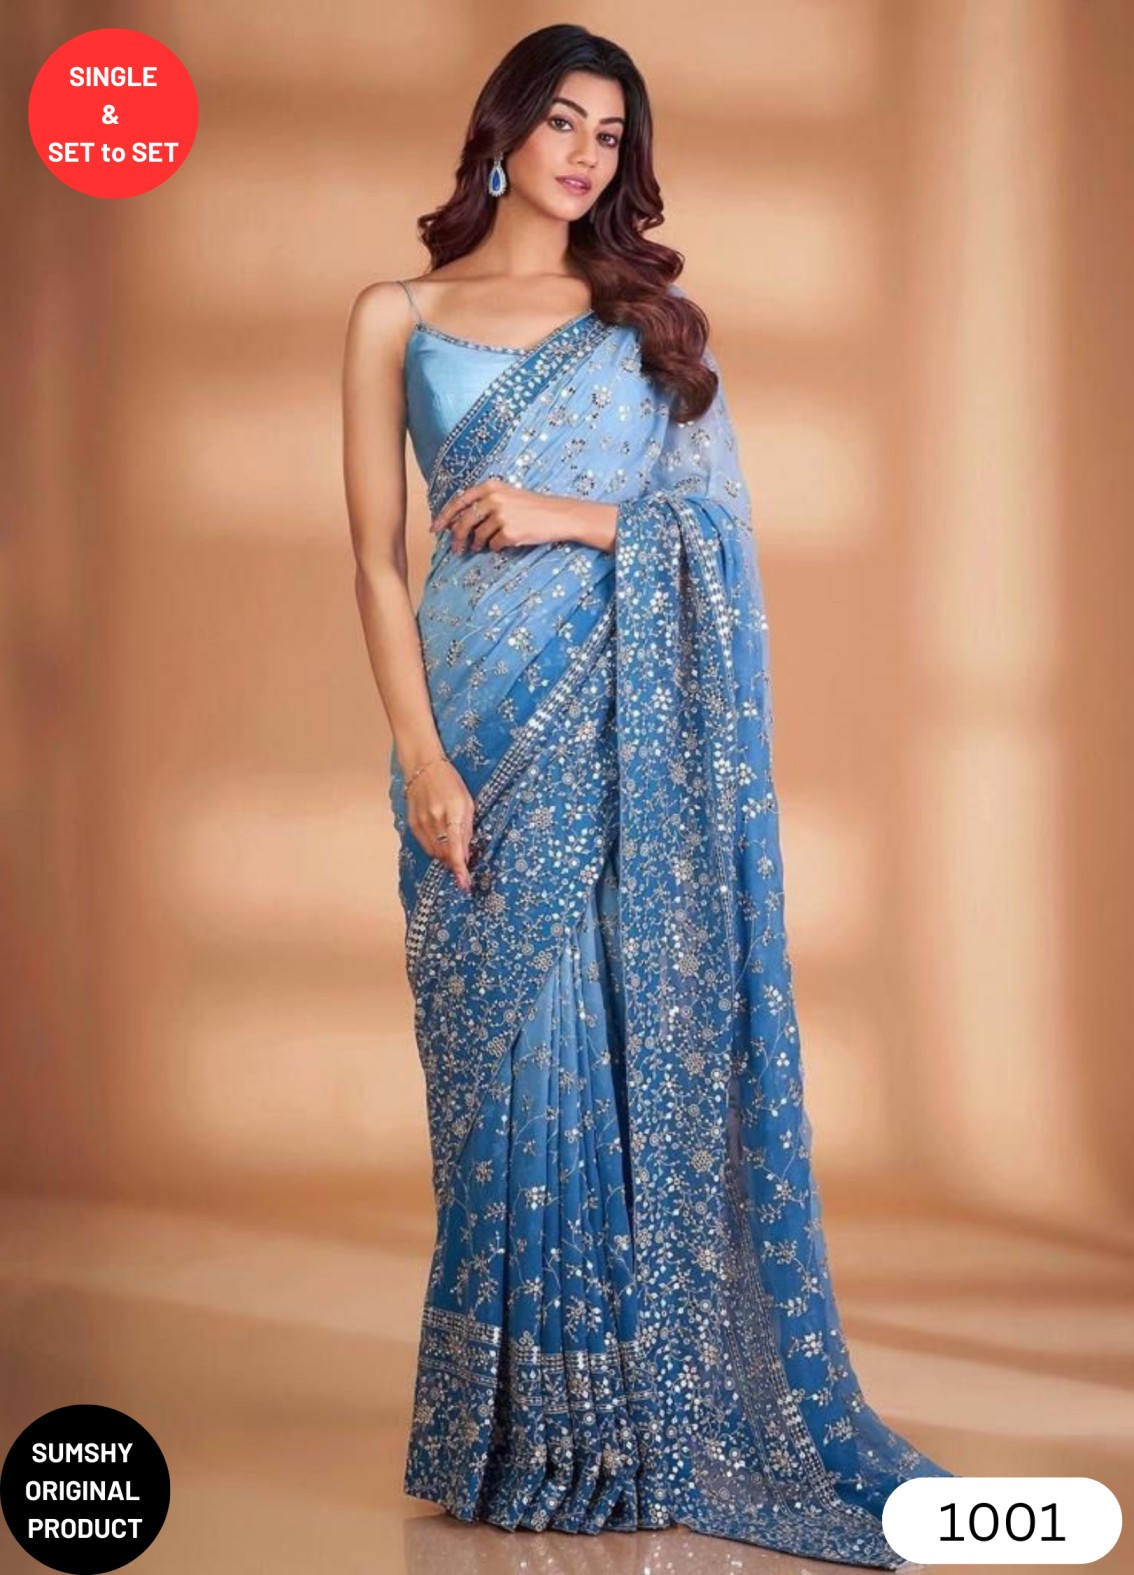 Saree Fashion Trends for 2022 That You Must Try This Season!